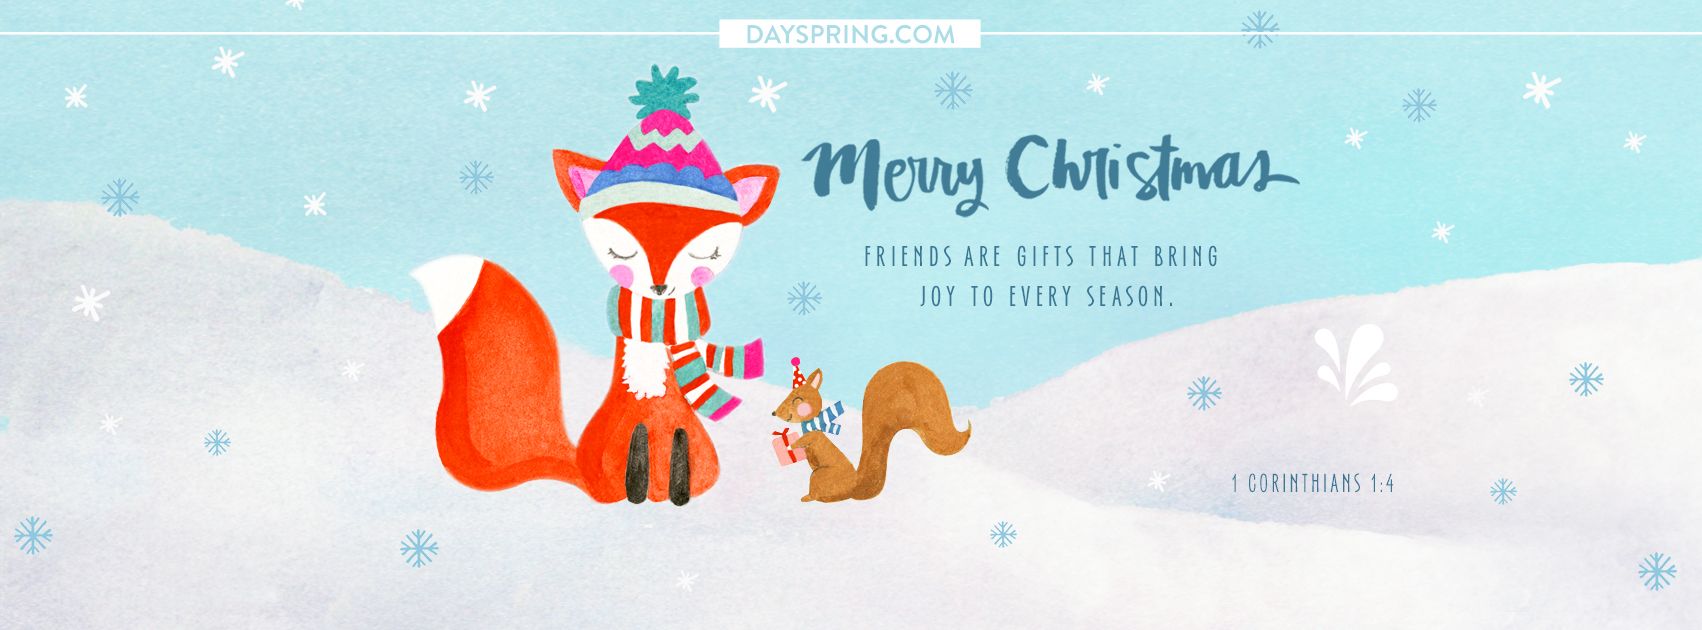 Facebook Cover Photo to Spice Up Your Profile for Christmas